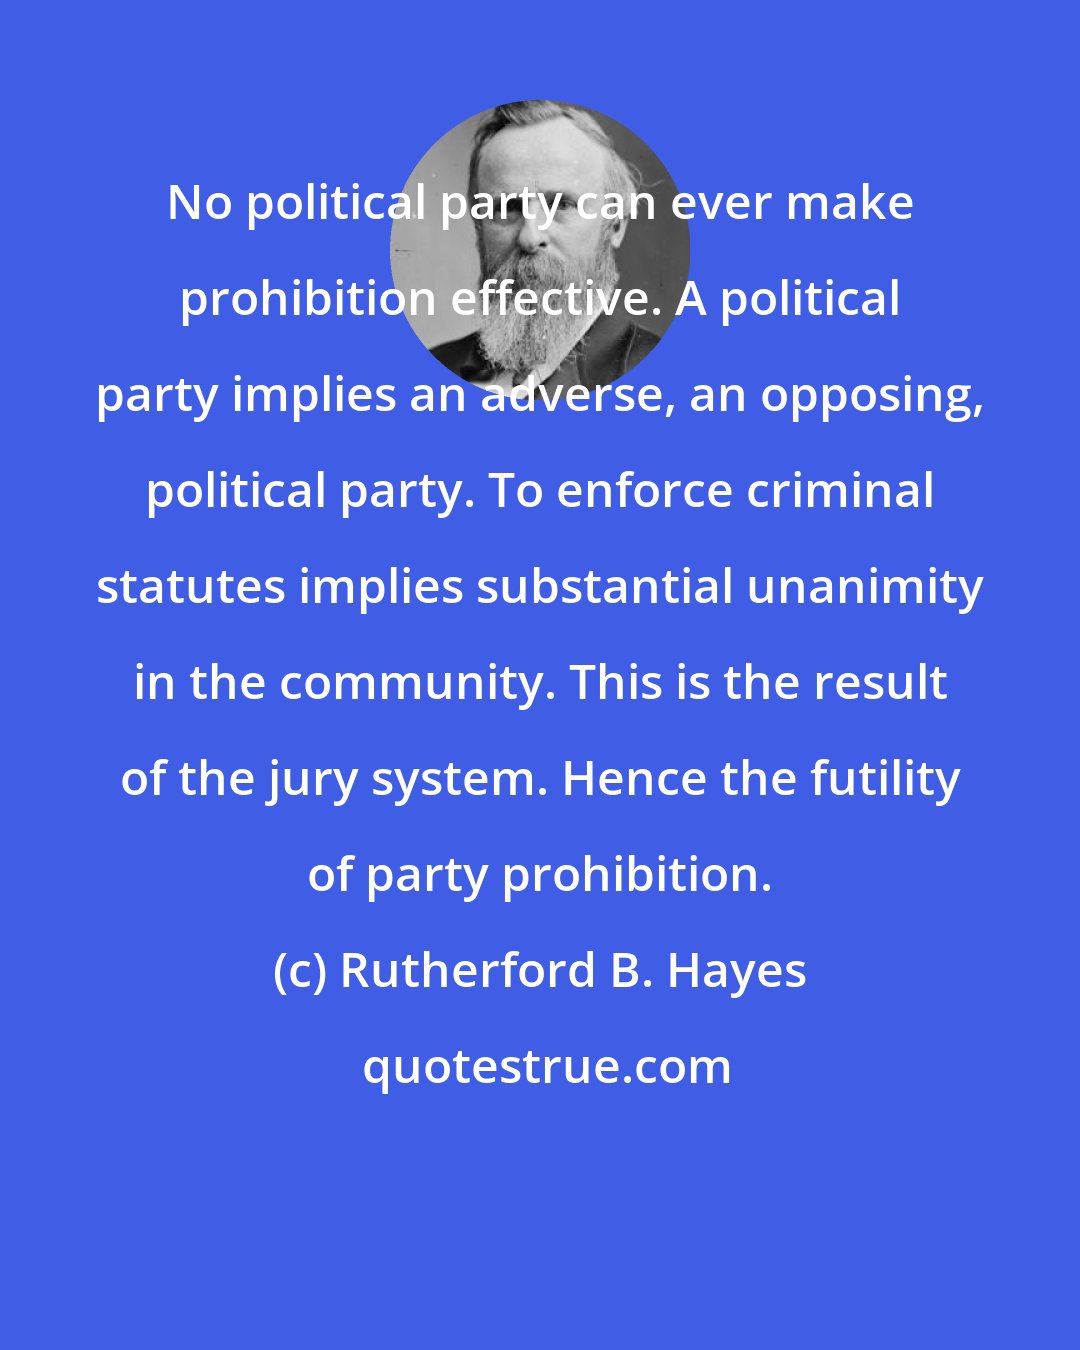 Rutherford B. Hayes: No political party can ever make prohibition effective. A political party implies an adverse, an opposing, political party. To enforce criminal statutes implies substantial unanimity in the community. This is the result of the jury system. Hence the futility of party prohibition.